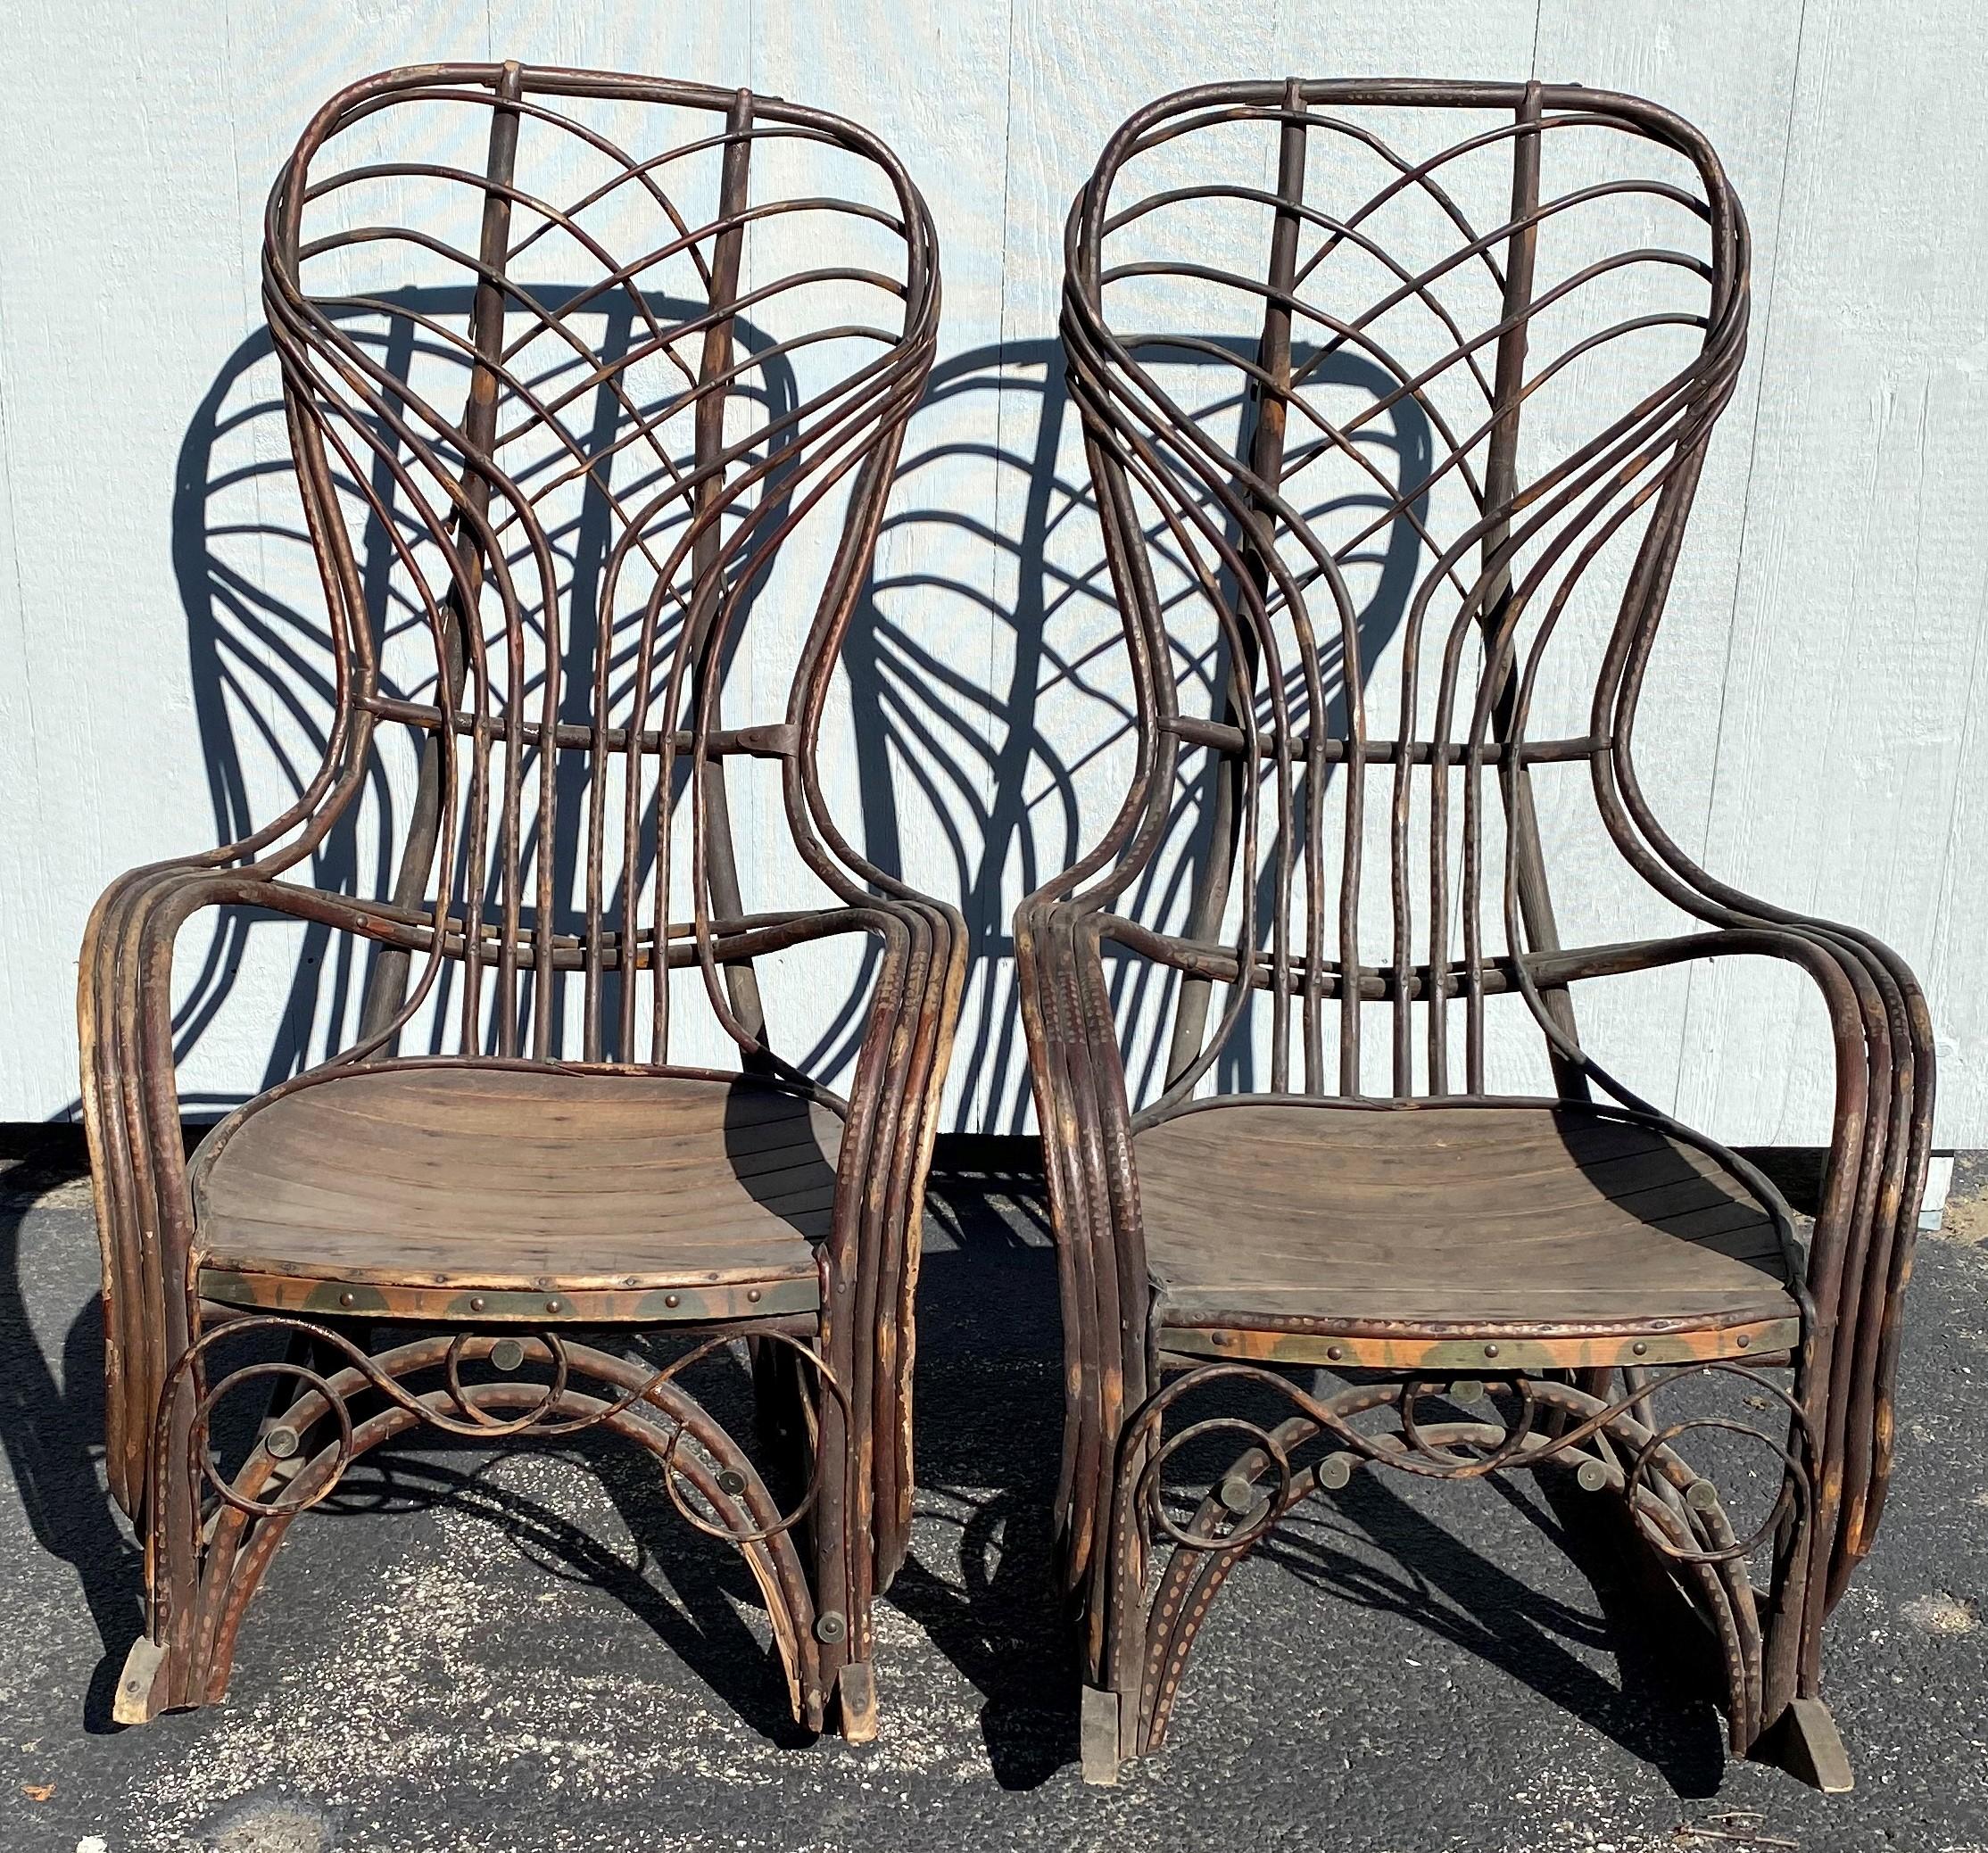 A fine pair of twig bentwood Adirondack rocking chairs with painted highlights and great overall patina, probably dating to the late 19th century in very good overall condition, with a few shrinkage splits, paint fade and losses, and other